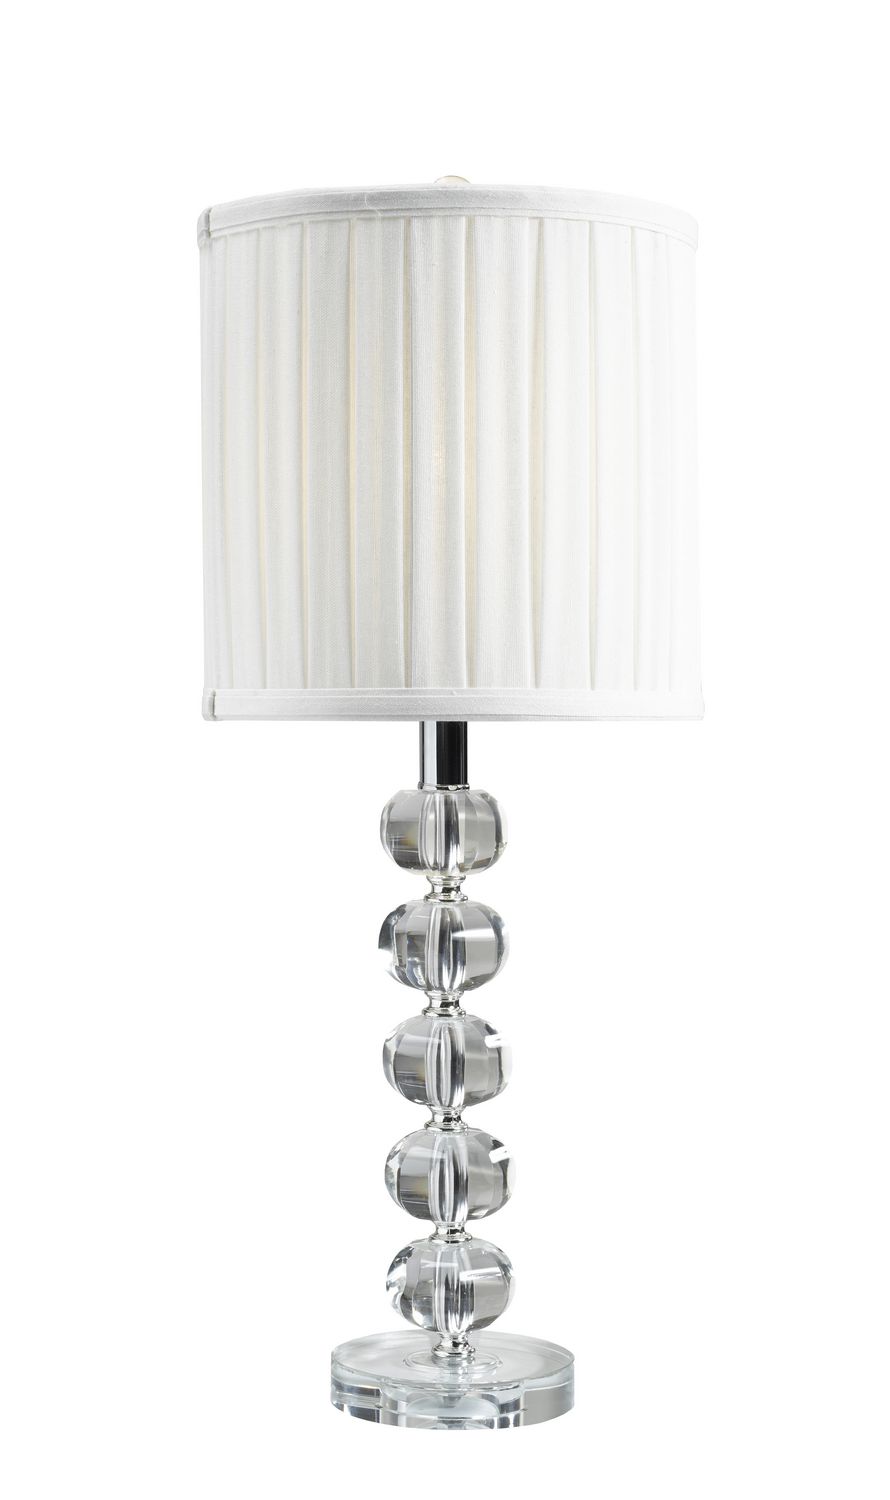 crystal table lamps canada